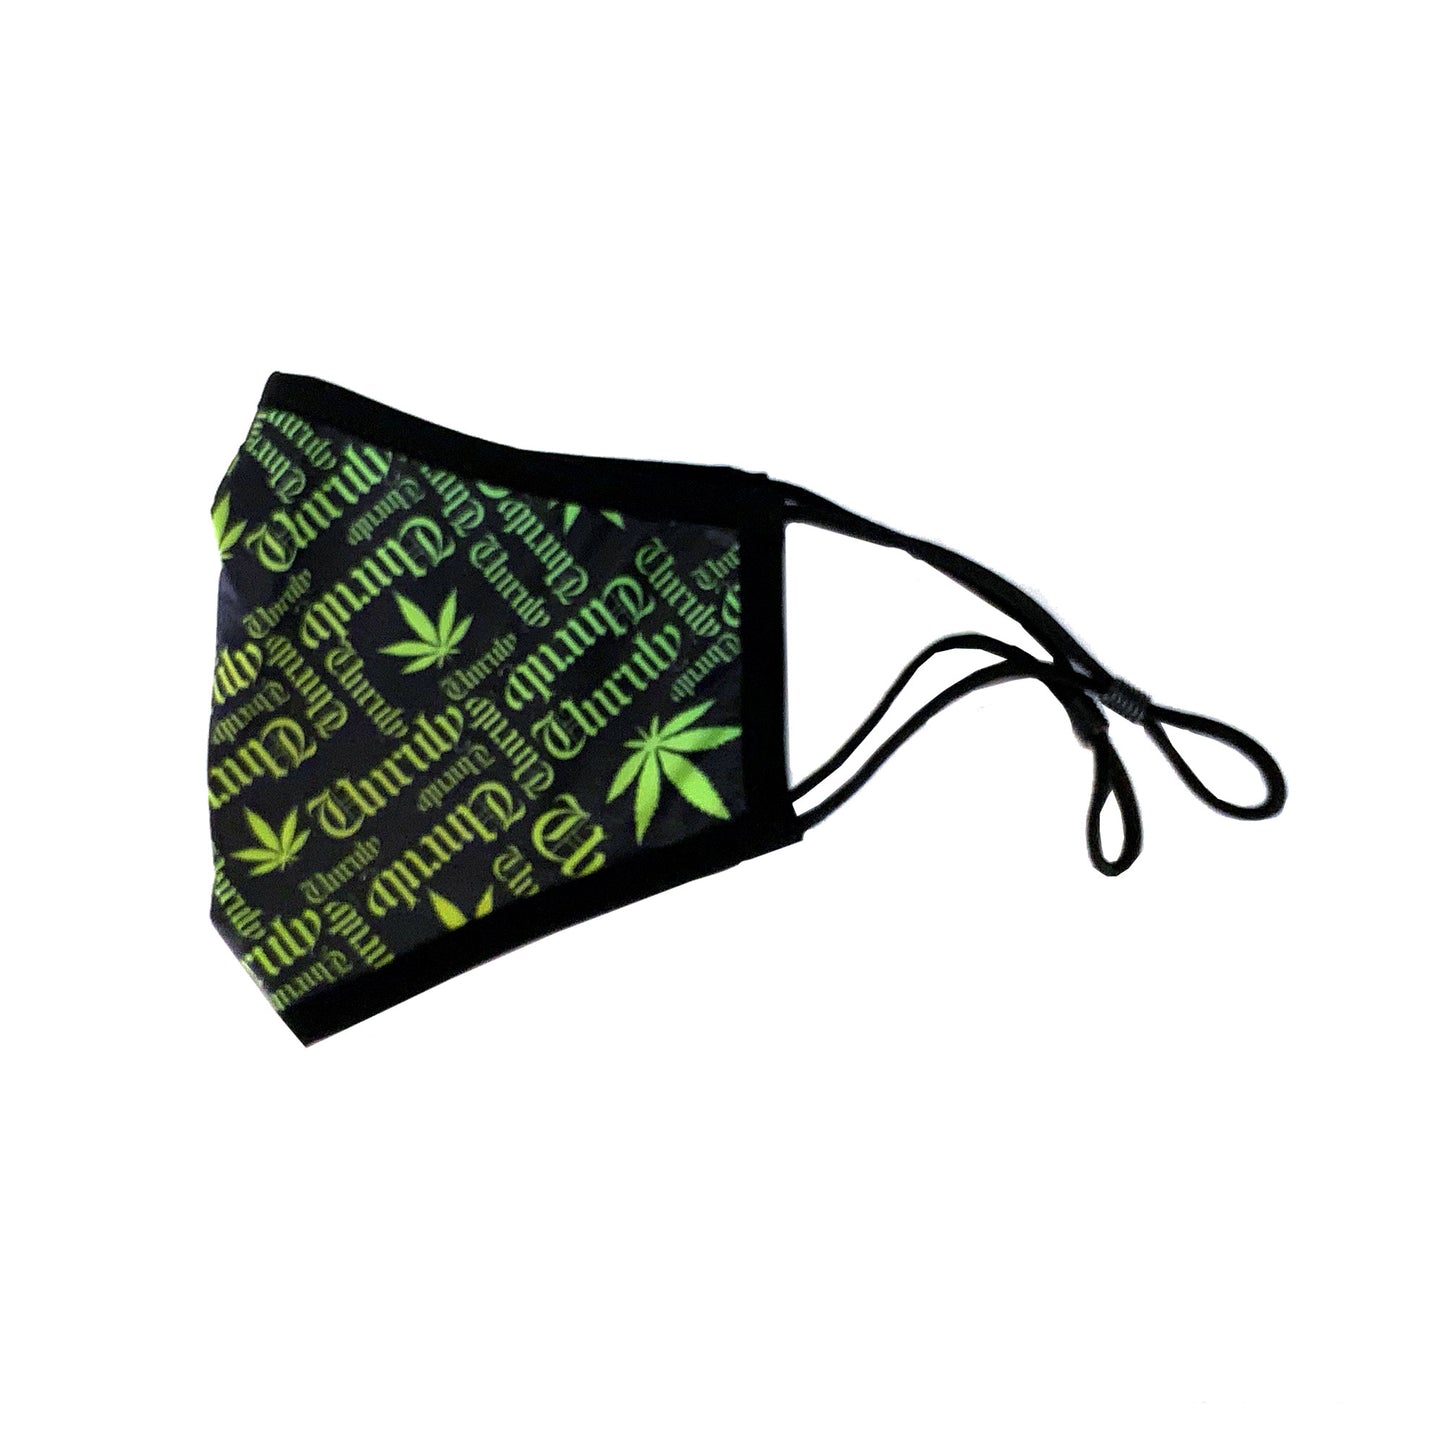 Unruly 420 Mask - Black/Lime Green/Yellow